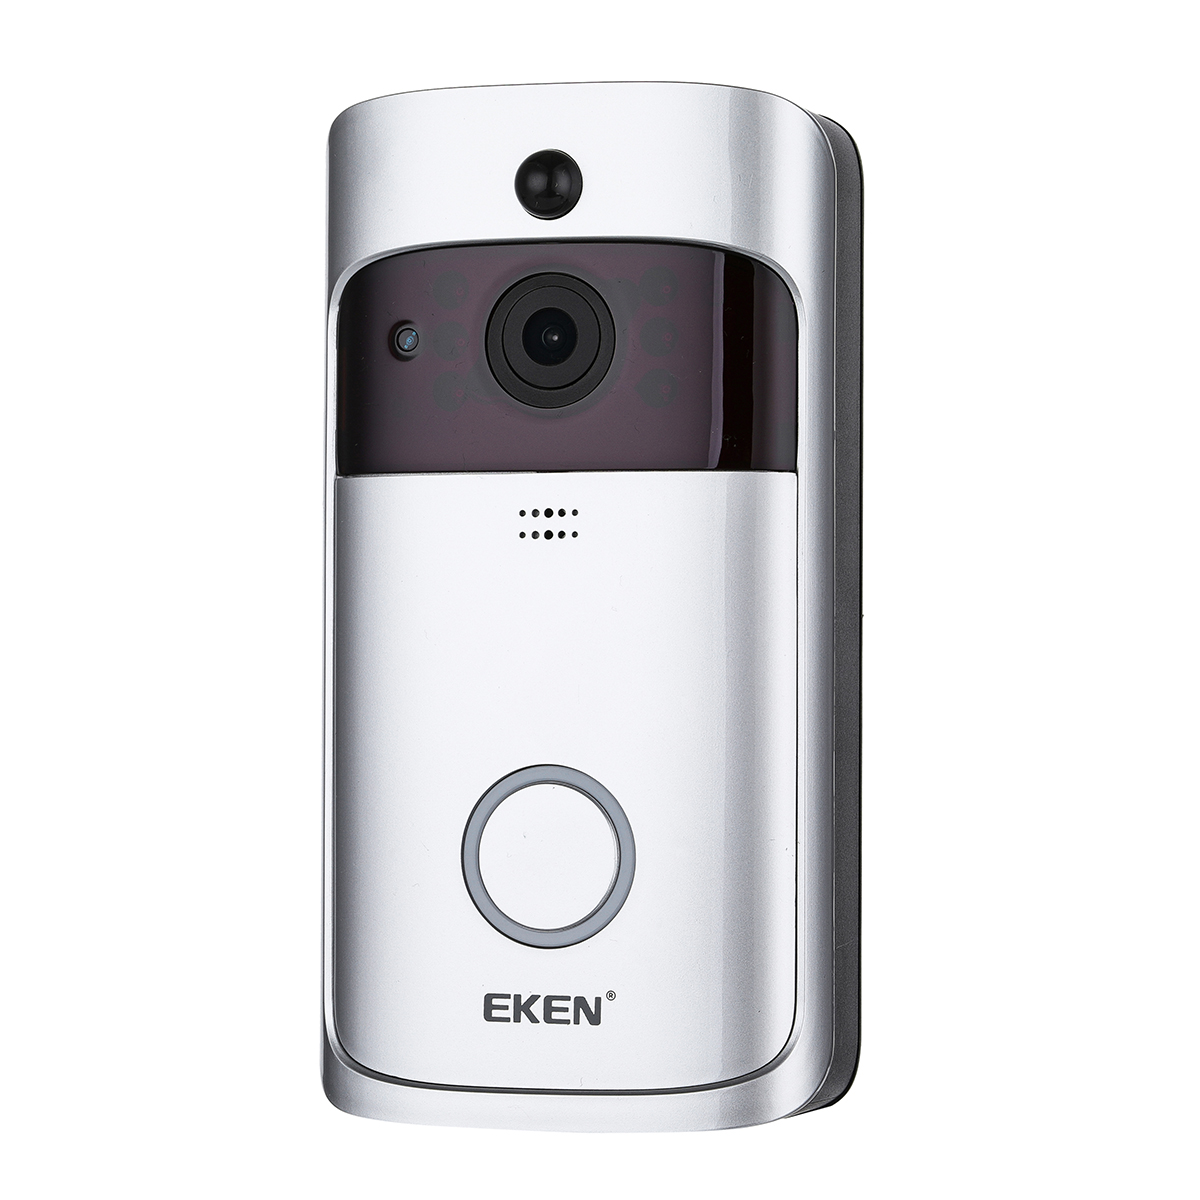 EKEN Video Doorbell 2 720P HD Wifi Camera Real-Time Video Two-Way Audio Wide-angle Lens Night Vision PIR Motion Detection App 2